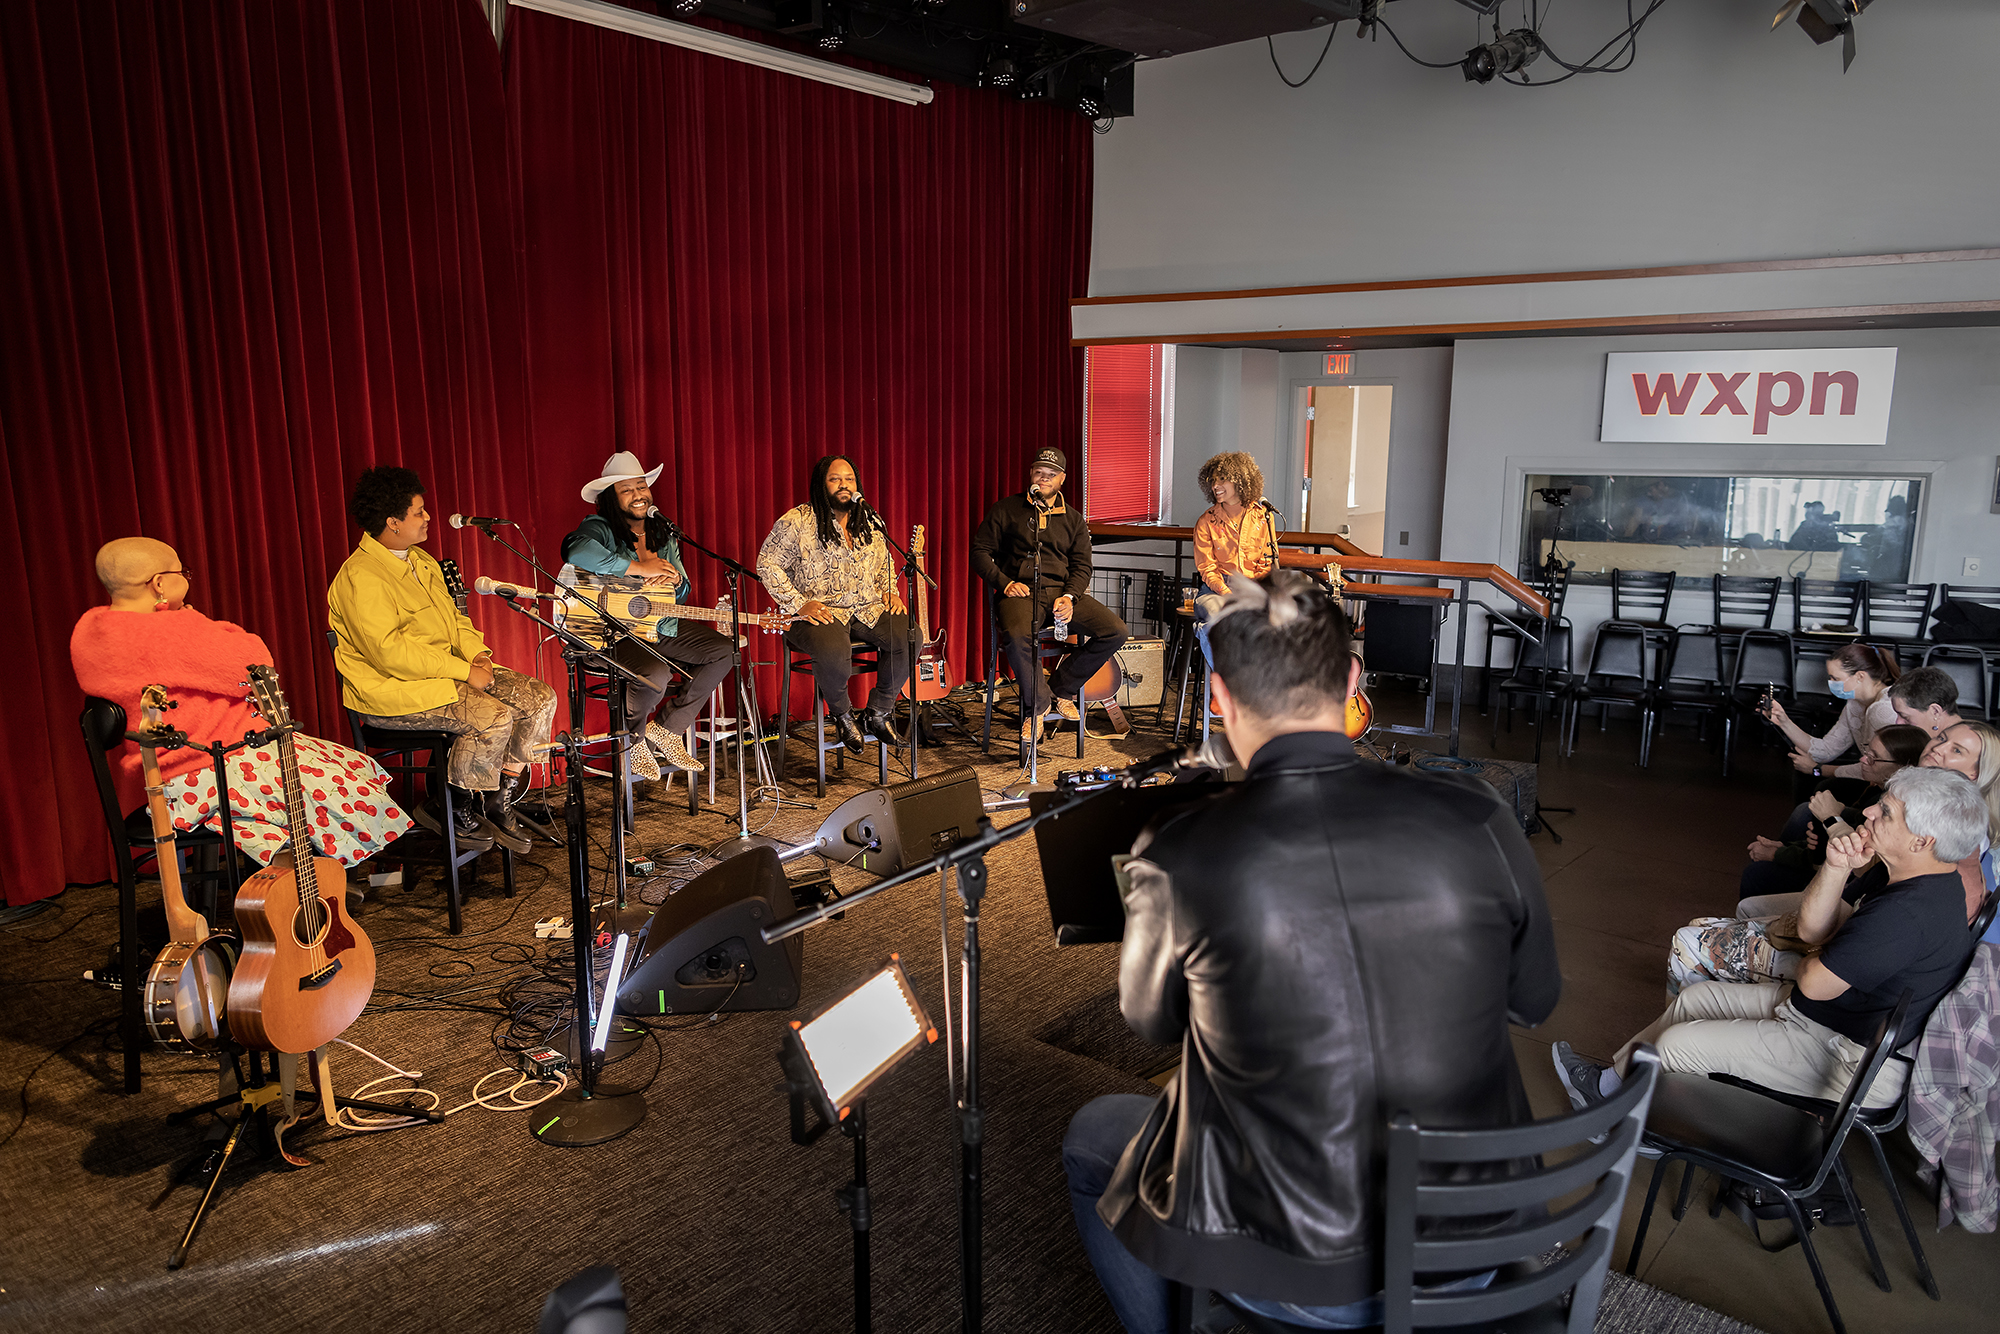 Members of a band seated in WXPN studio in front of a small audience.